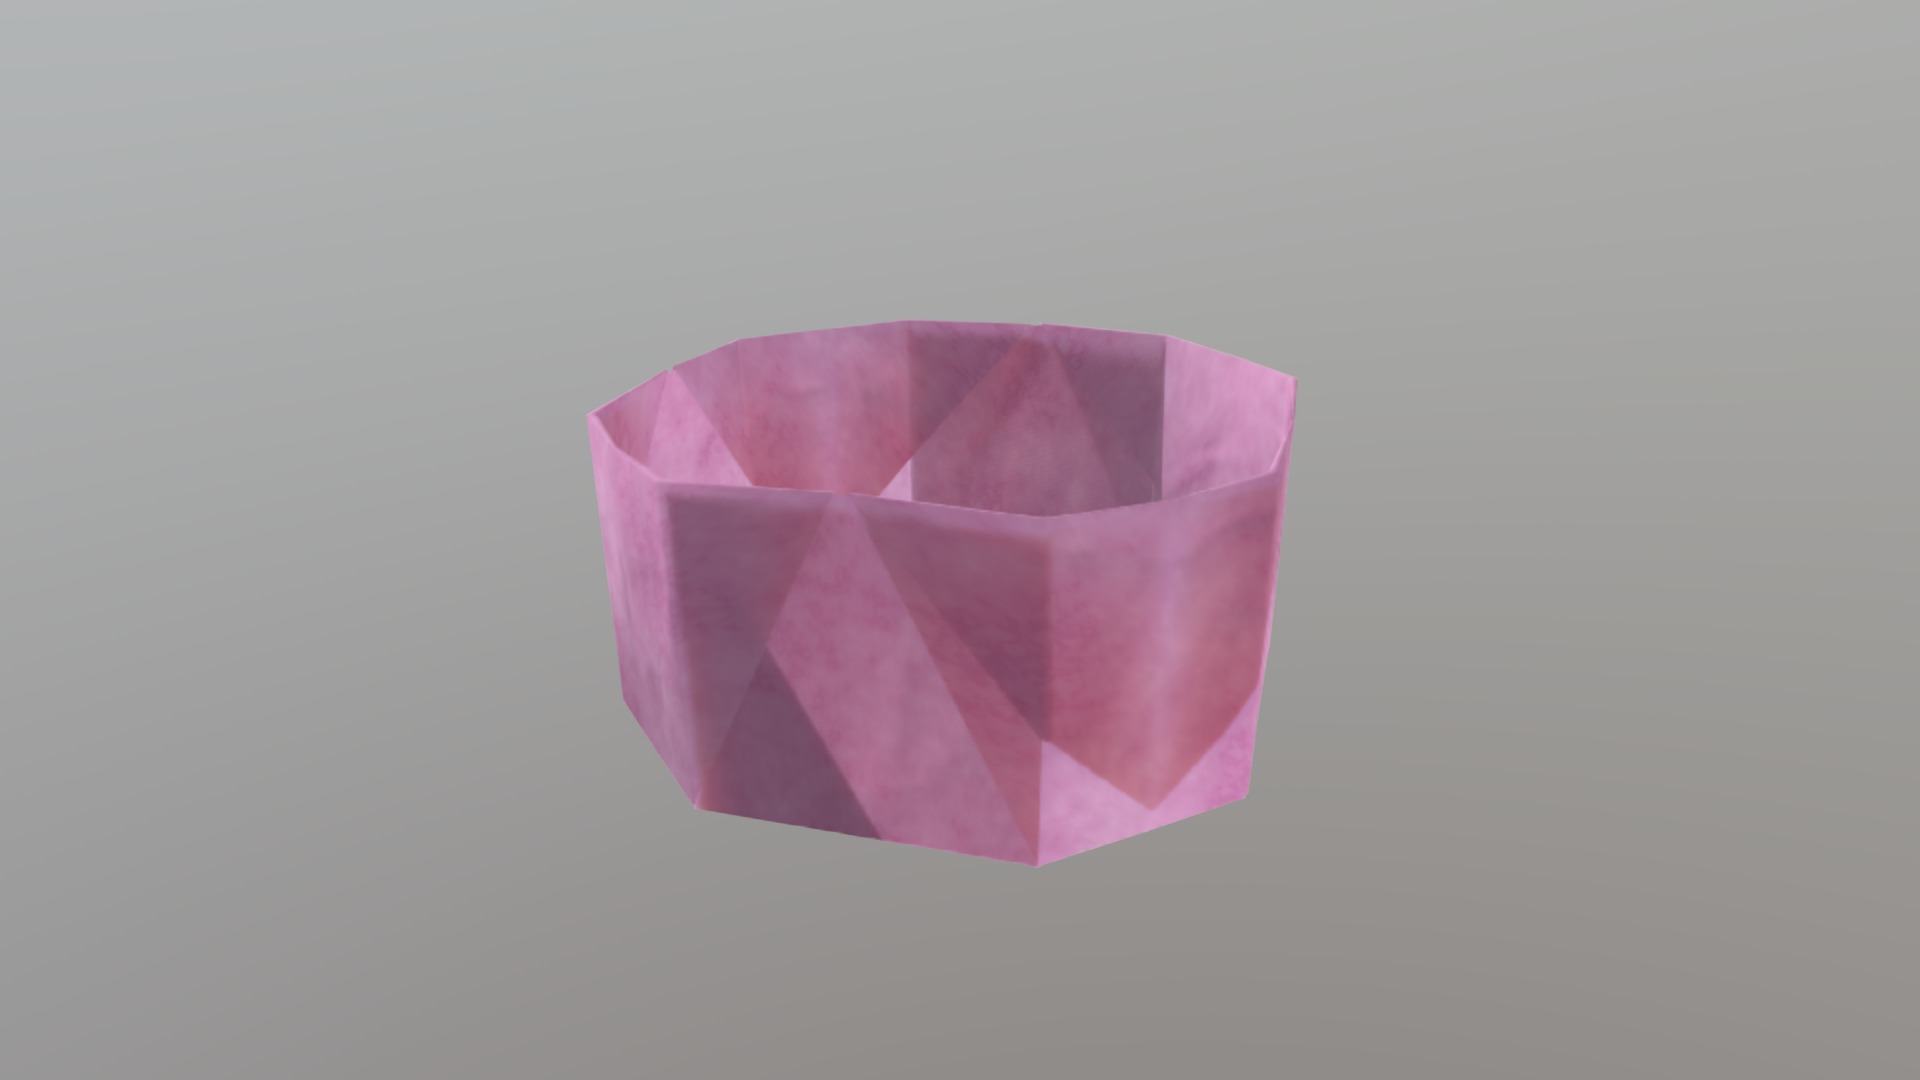 3D model Origami Bowl - This is a 3D model of the Origami Bowl. The 3D model is about a pink cube on a white background.